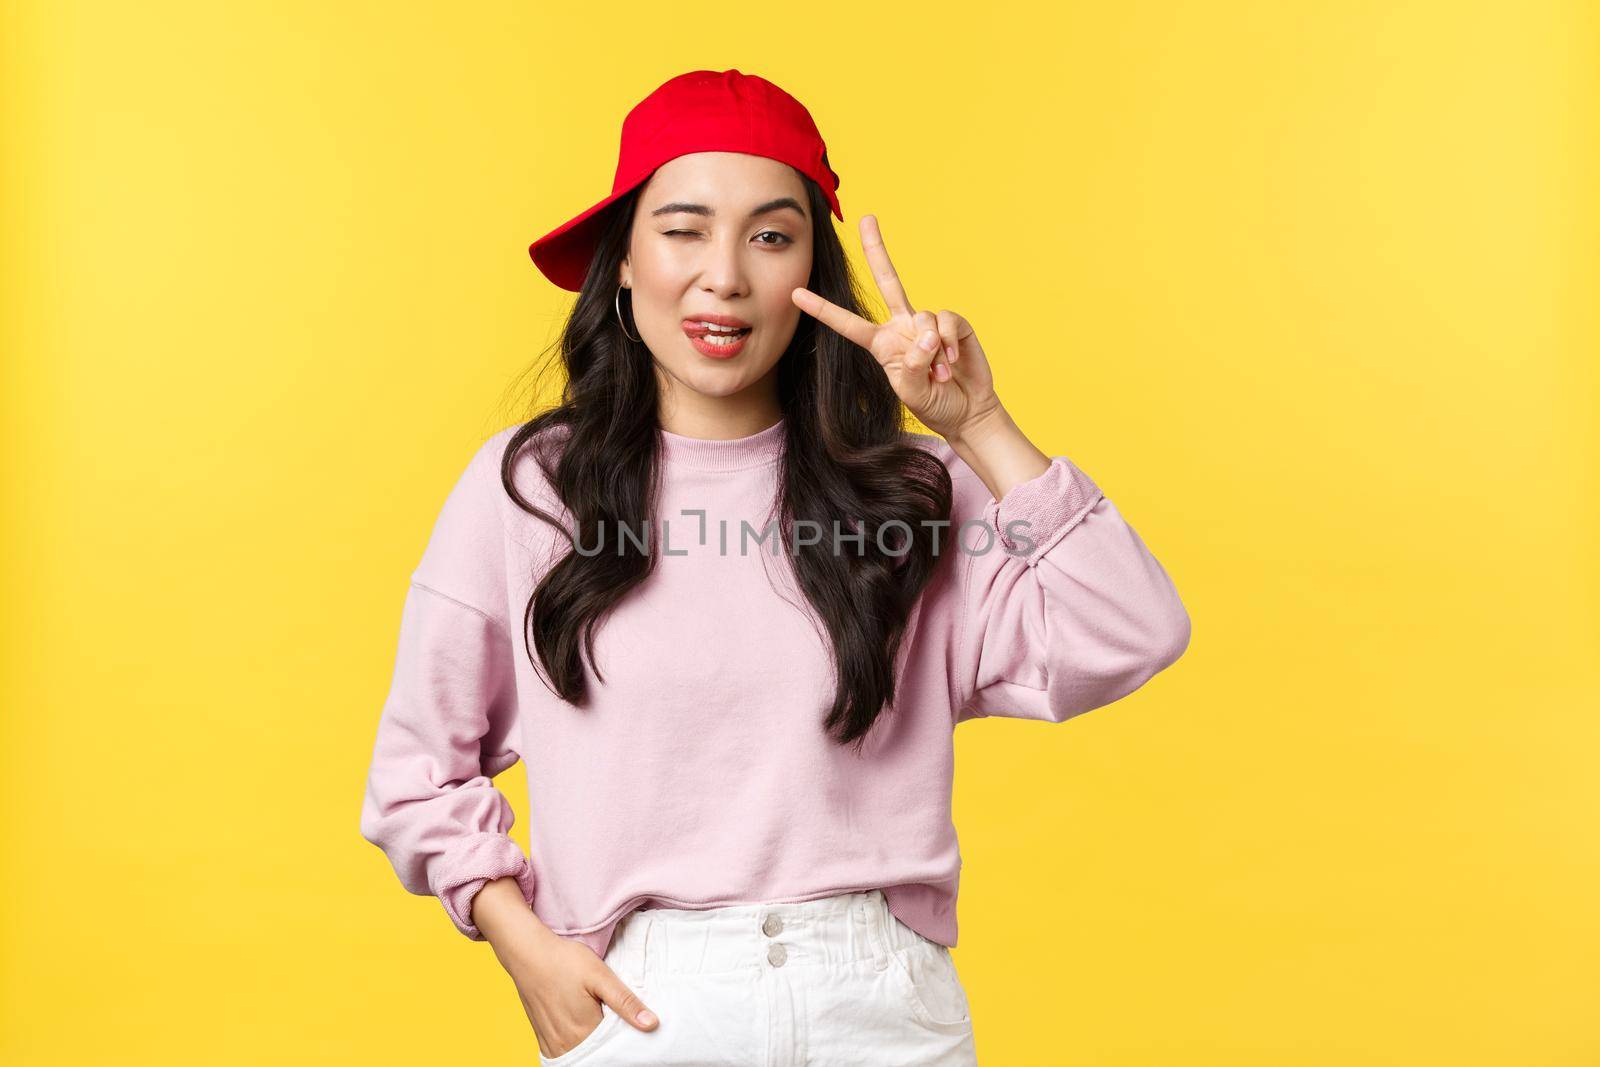 People emotions, lifestyle leisure and beauty concept. Stylish and cool asian girl in rnb red cap, showing peace sign and wink at camera, looking good in outfit over yellow background.